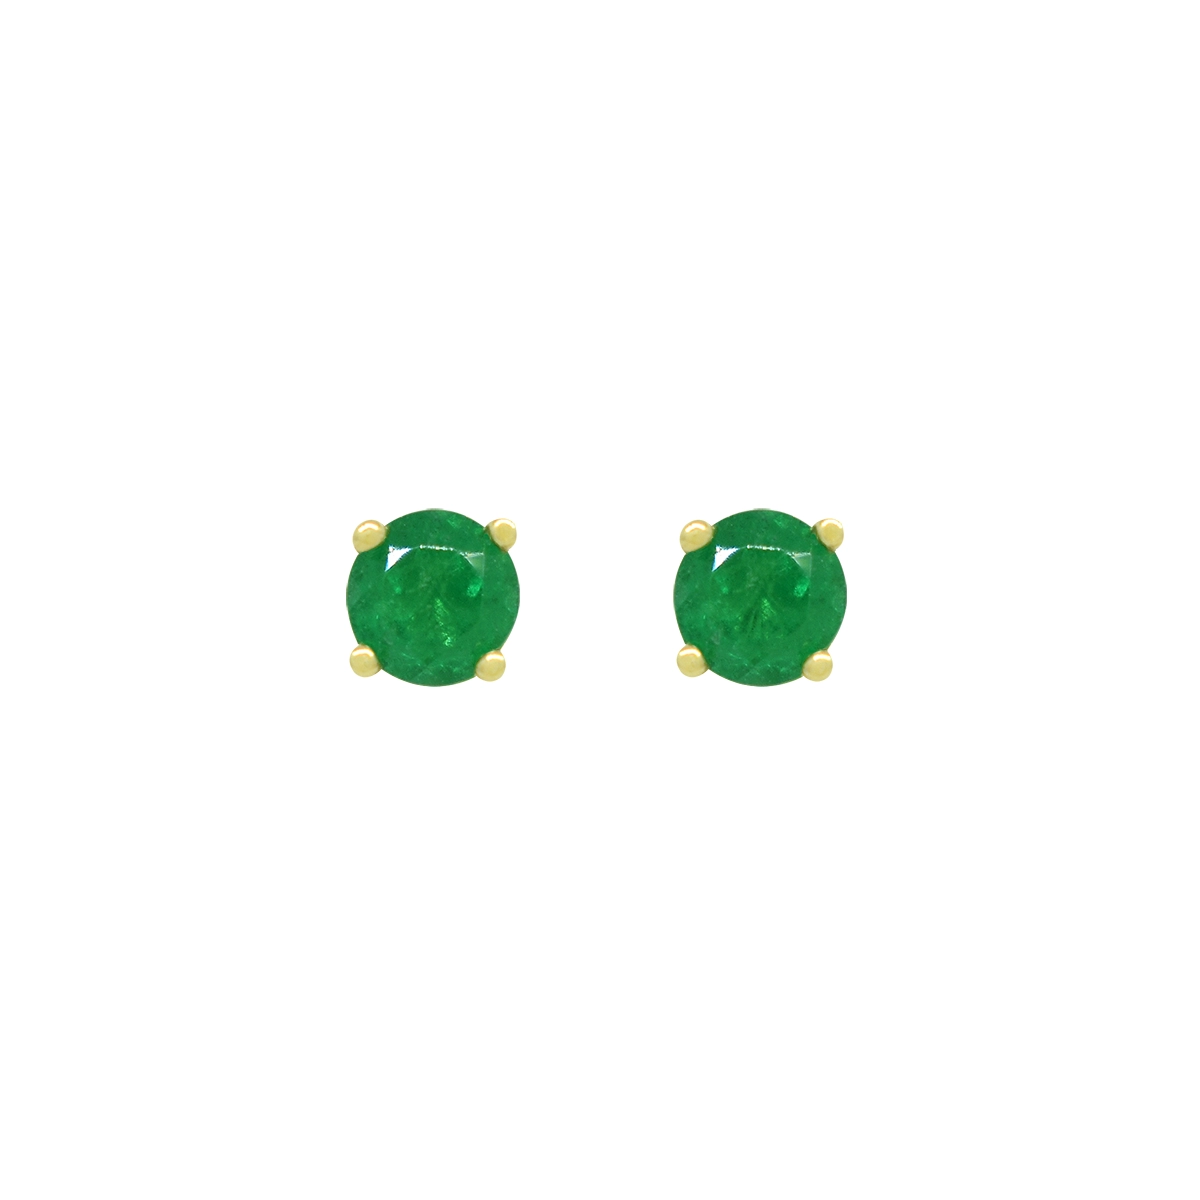 Emerald stud earrings with 2 round-cut natural Colombian emeralds in 0.50 Ct. t.w. set in solid 18K yellow gold